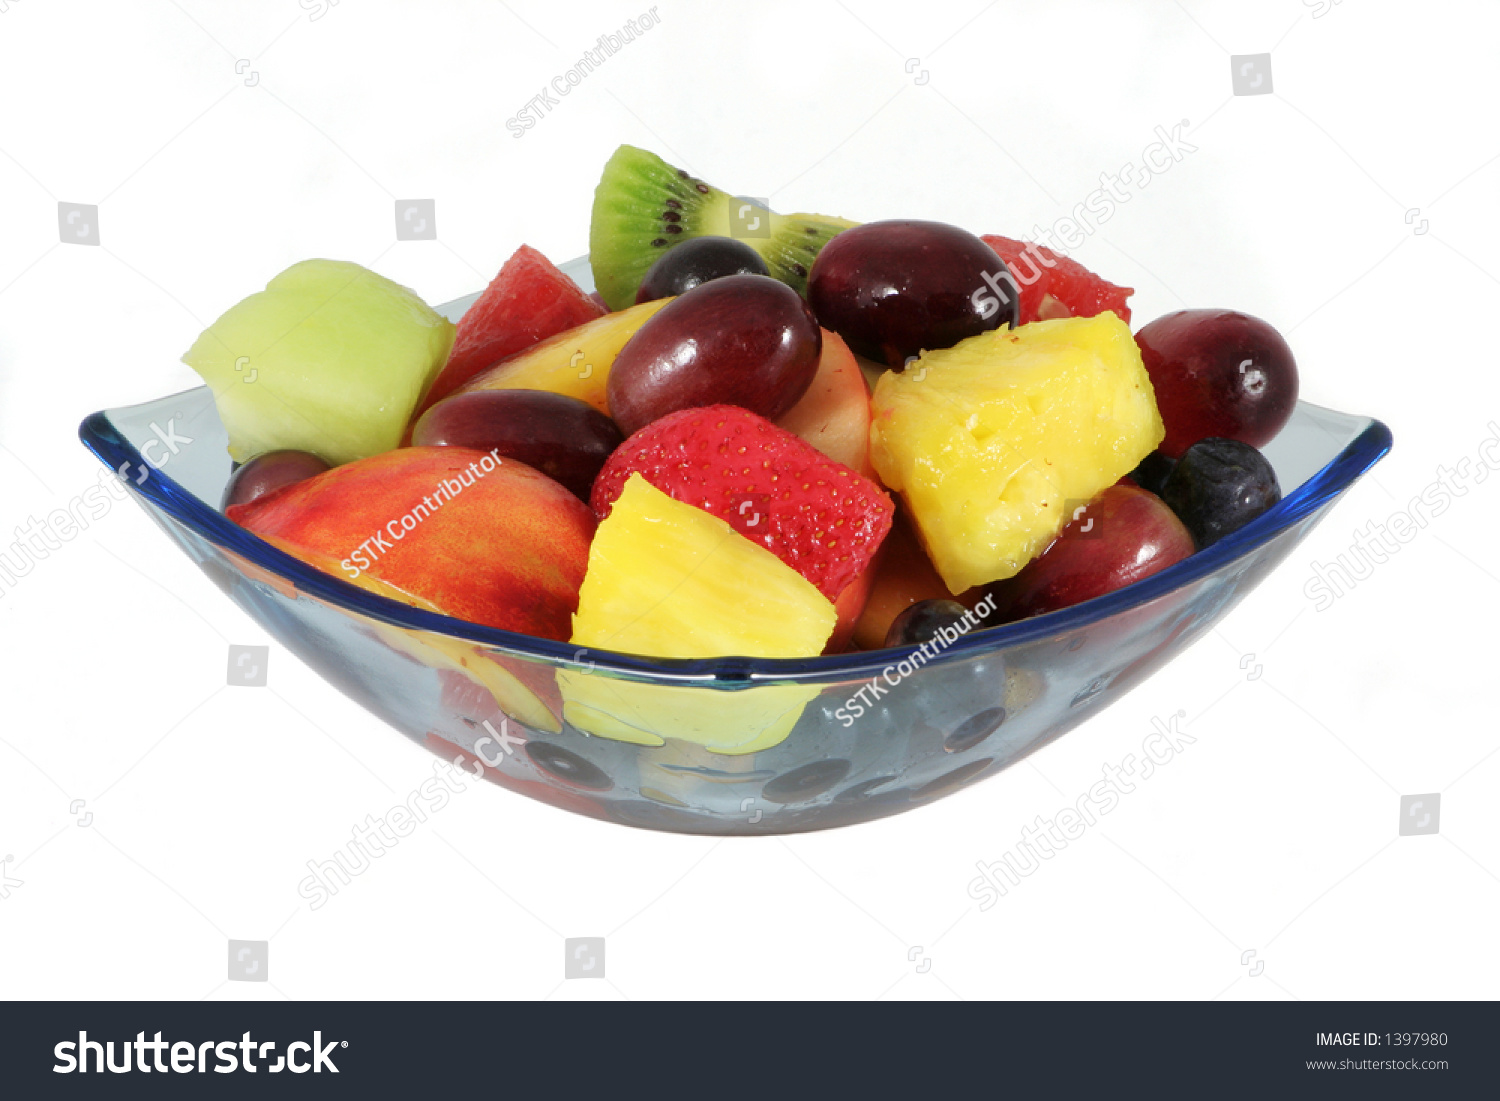 Fruit salad in a glass bowl #1397980